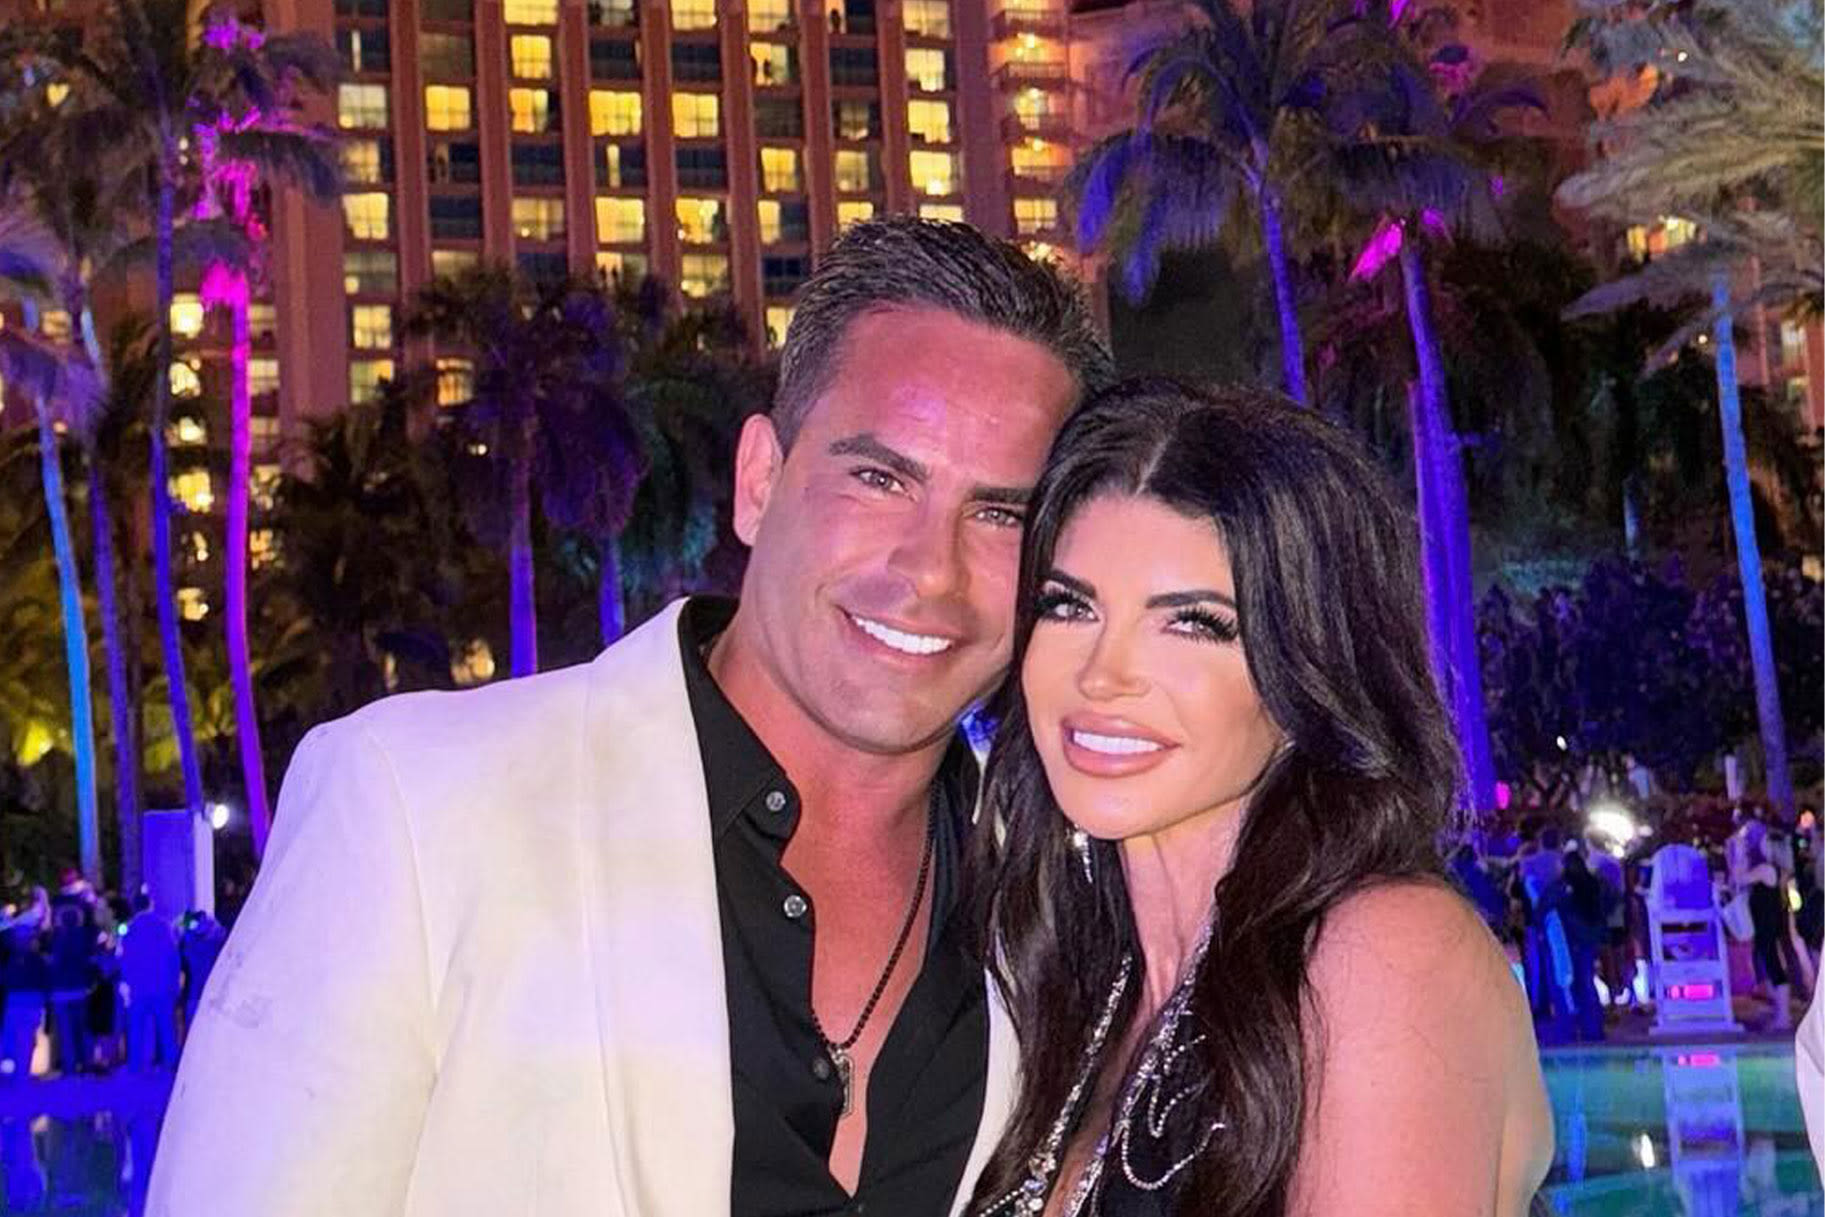 Teresa Giudice Reveals How She'll Celebrate Louie After They've "Been Through a Lot" | Bravo TV Official Site